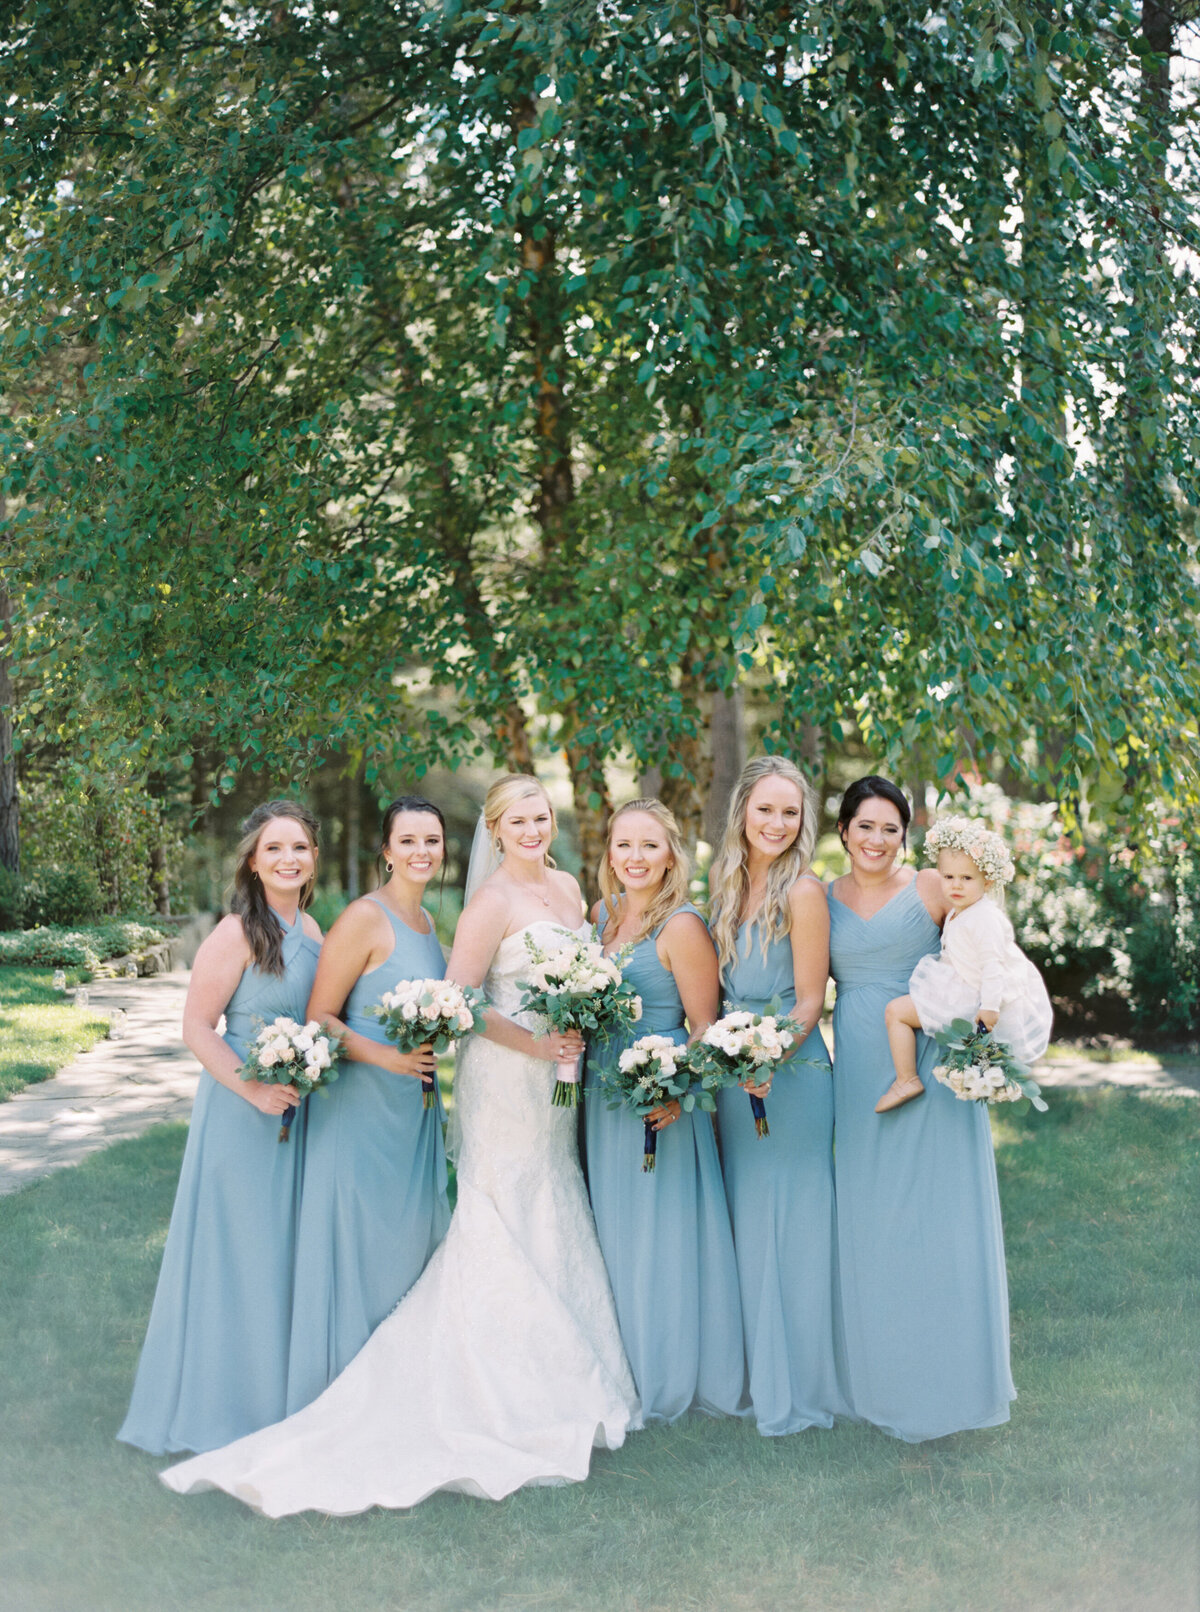 Bride with her bridesmaids photographed by Chicago editorial wedding photographer Arielle Peters